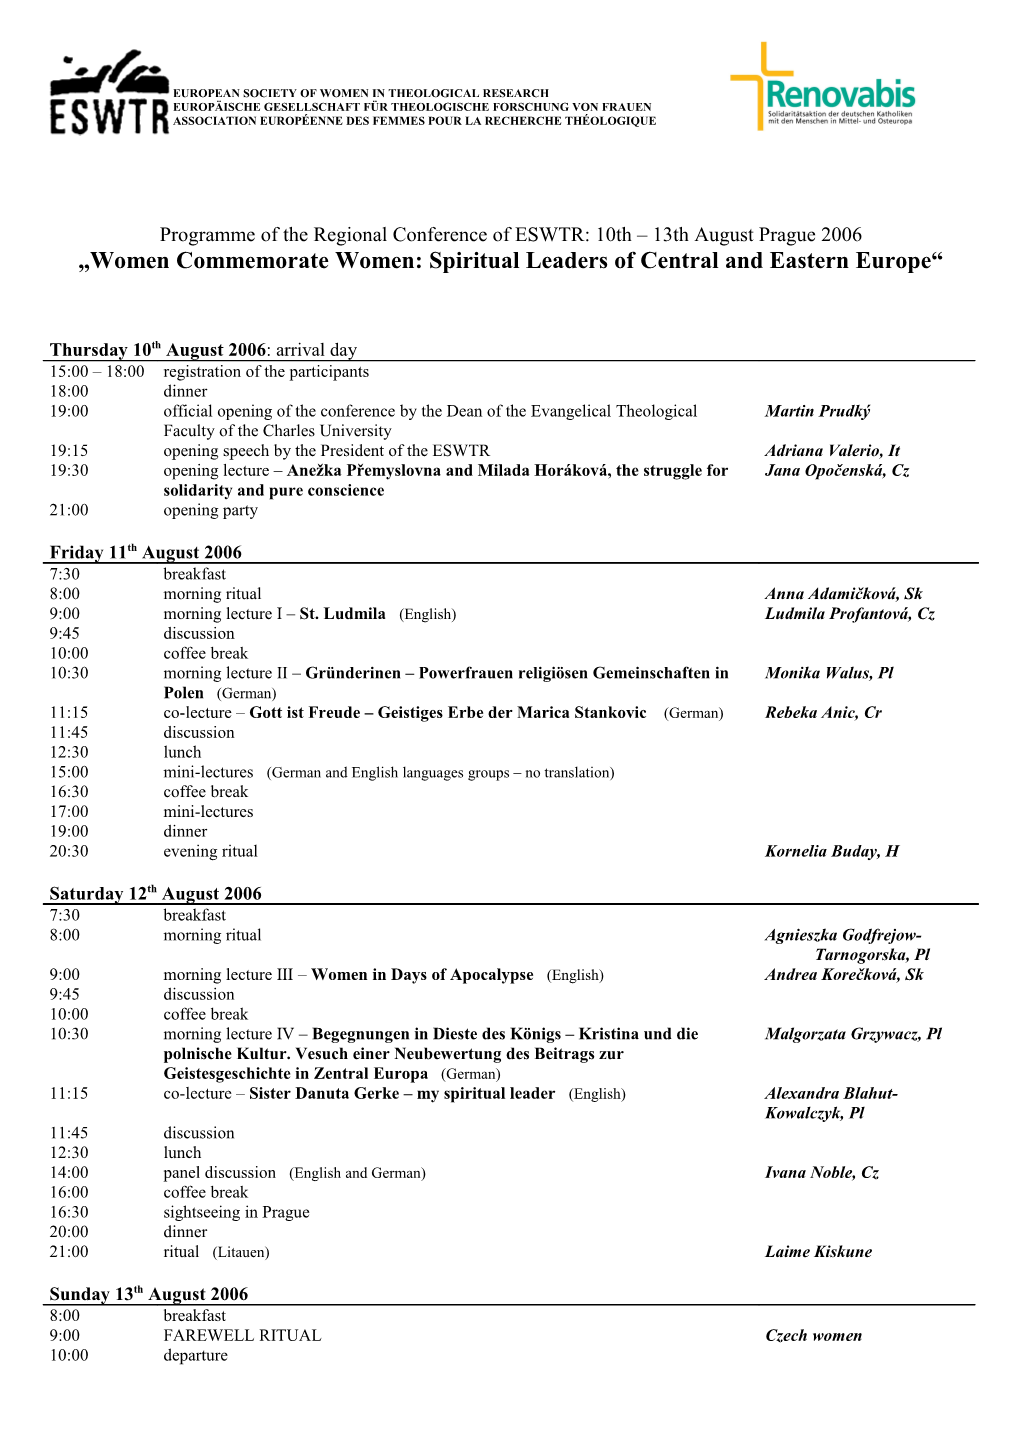 Programme of the Regional Conference of ESWTR, 10Th 13Th August Prague 2006